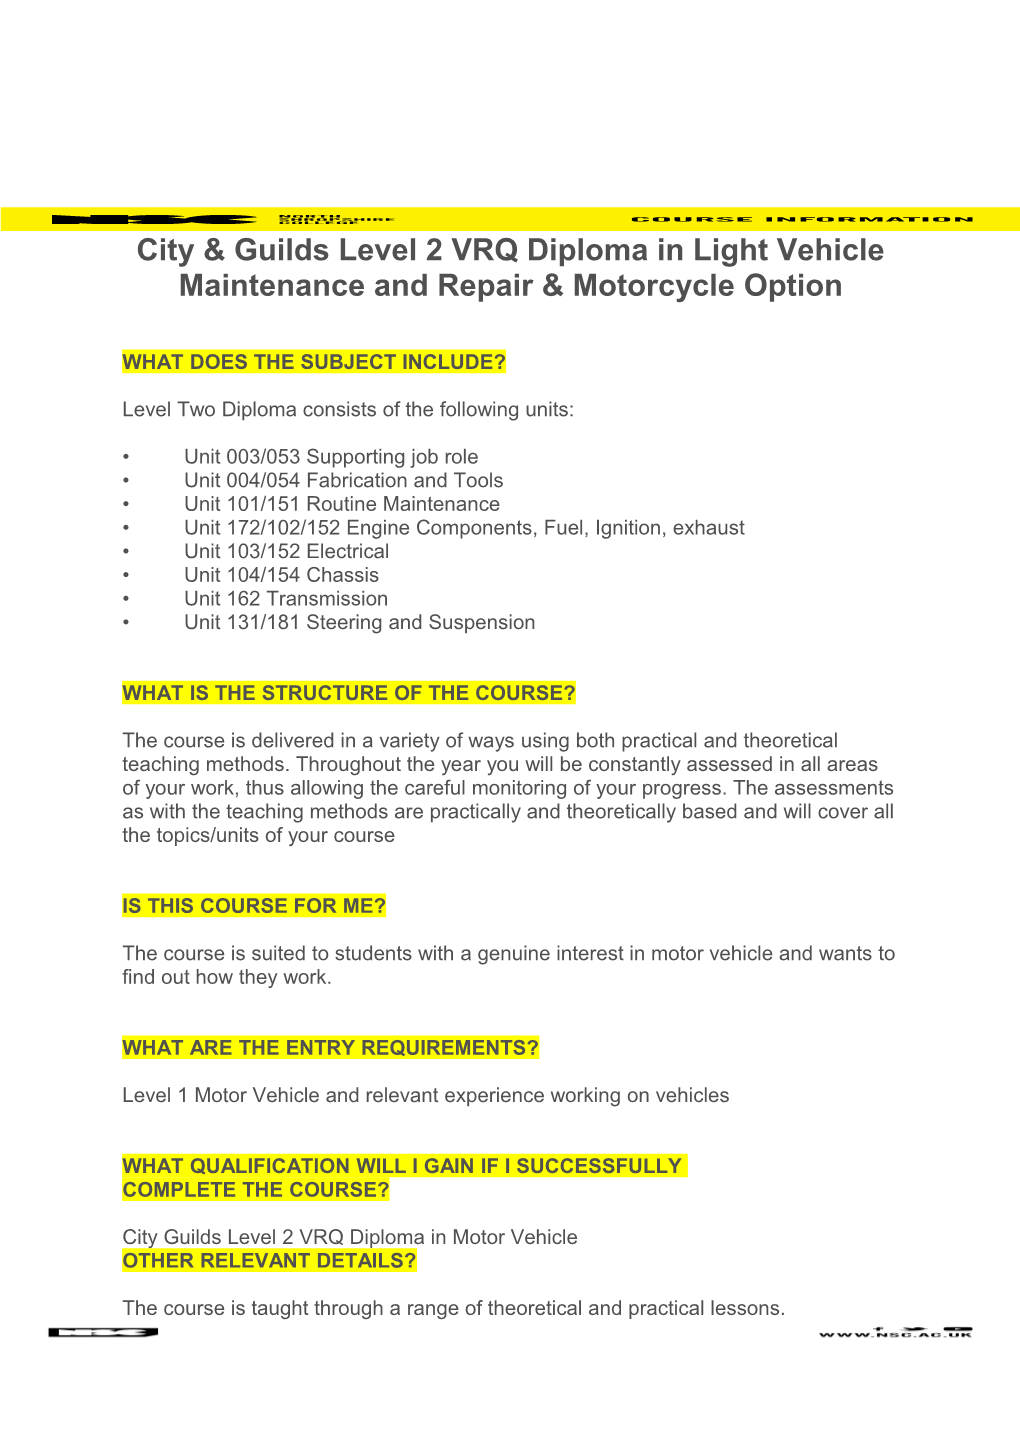 City & Guilds Level 2 VRQ Diploma in Light Vehicle Maintenance and Repair & Motorcycle Option